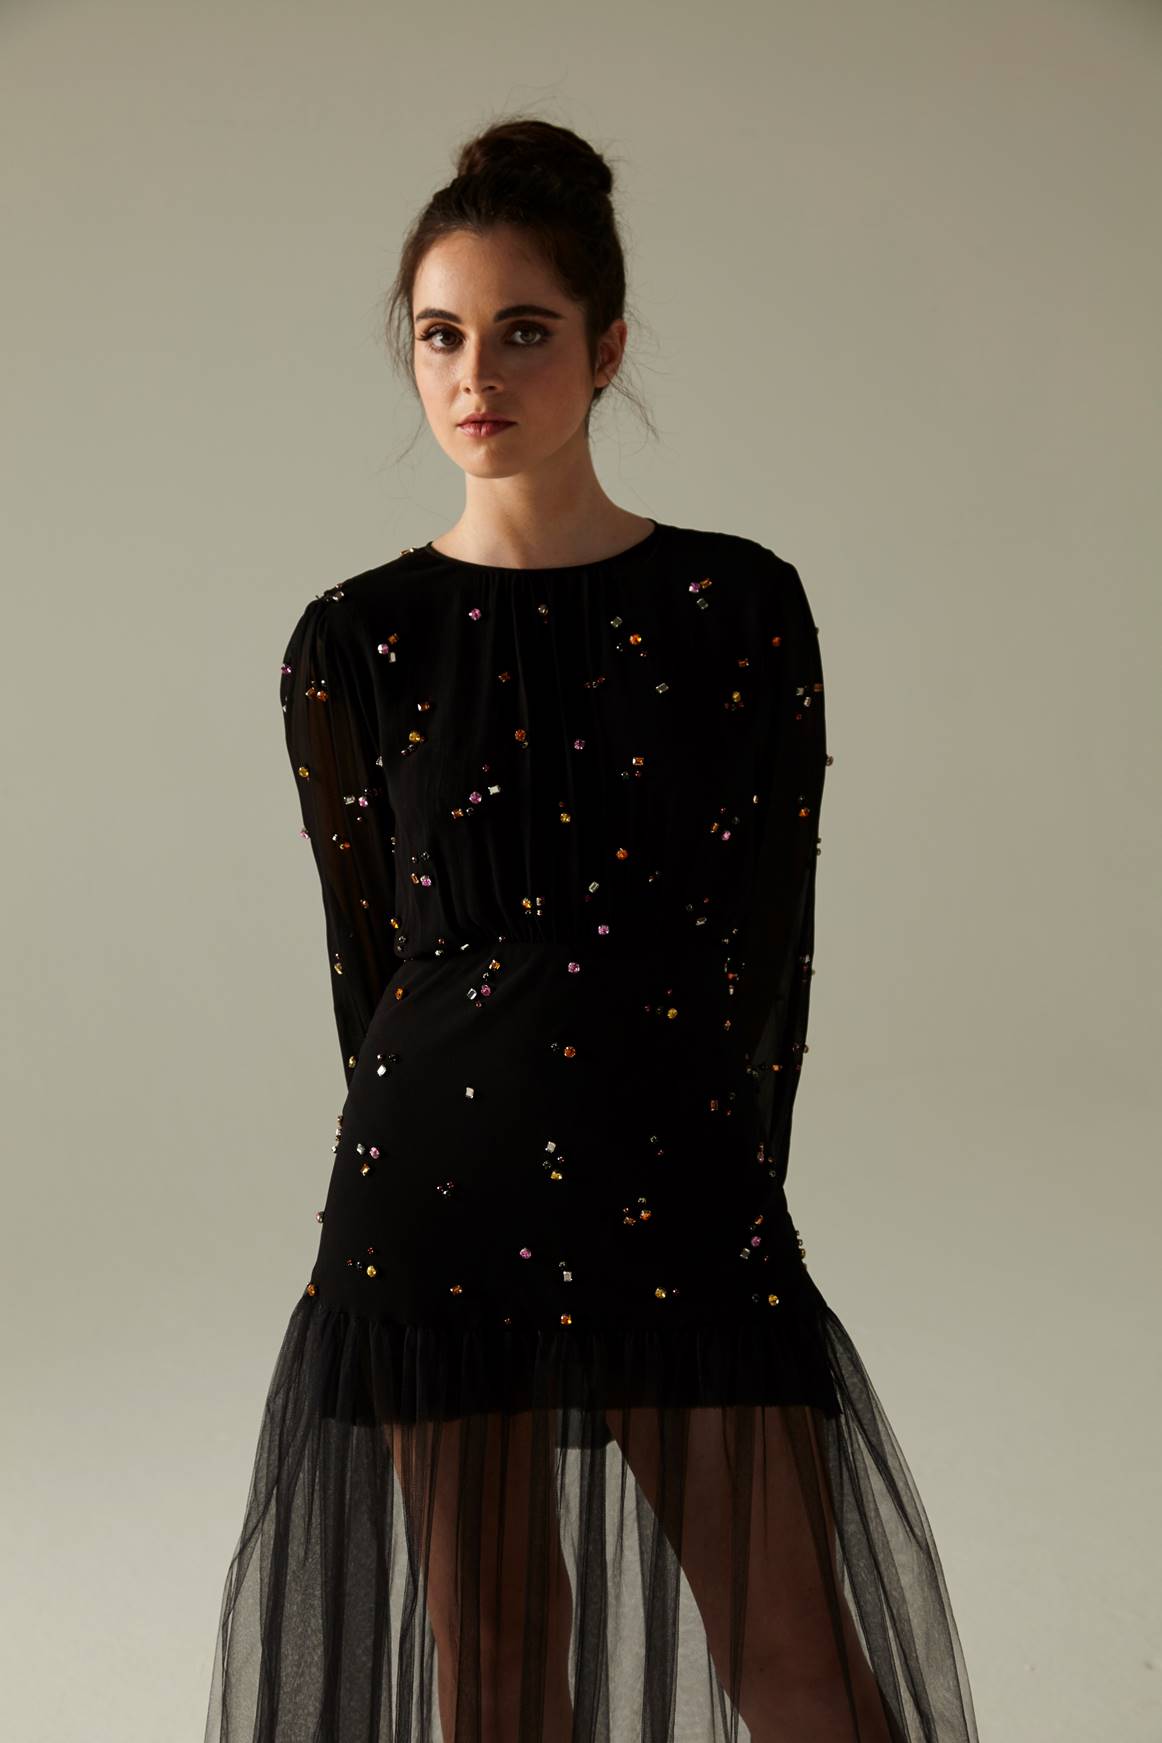 A picture of a woman in a black dress with a sequin bottom